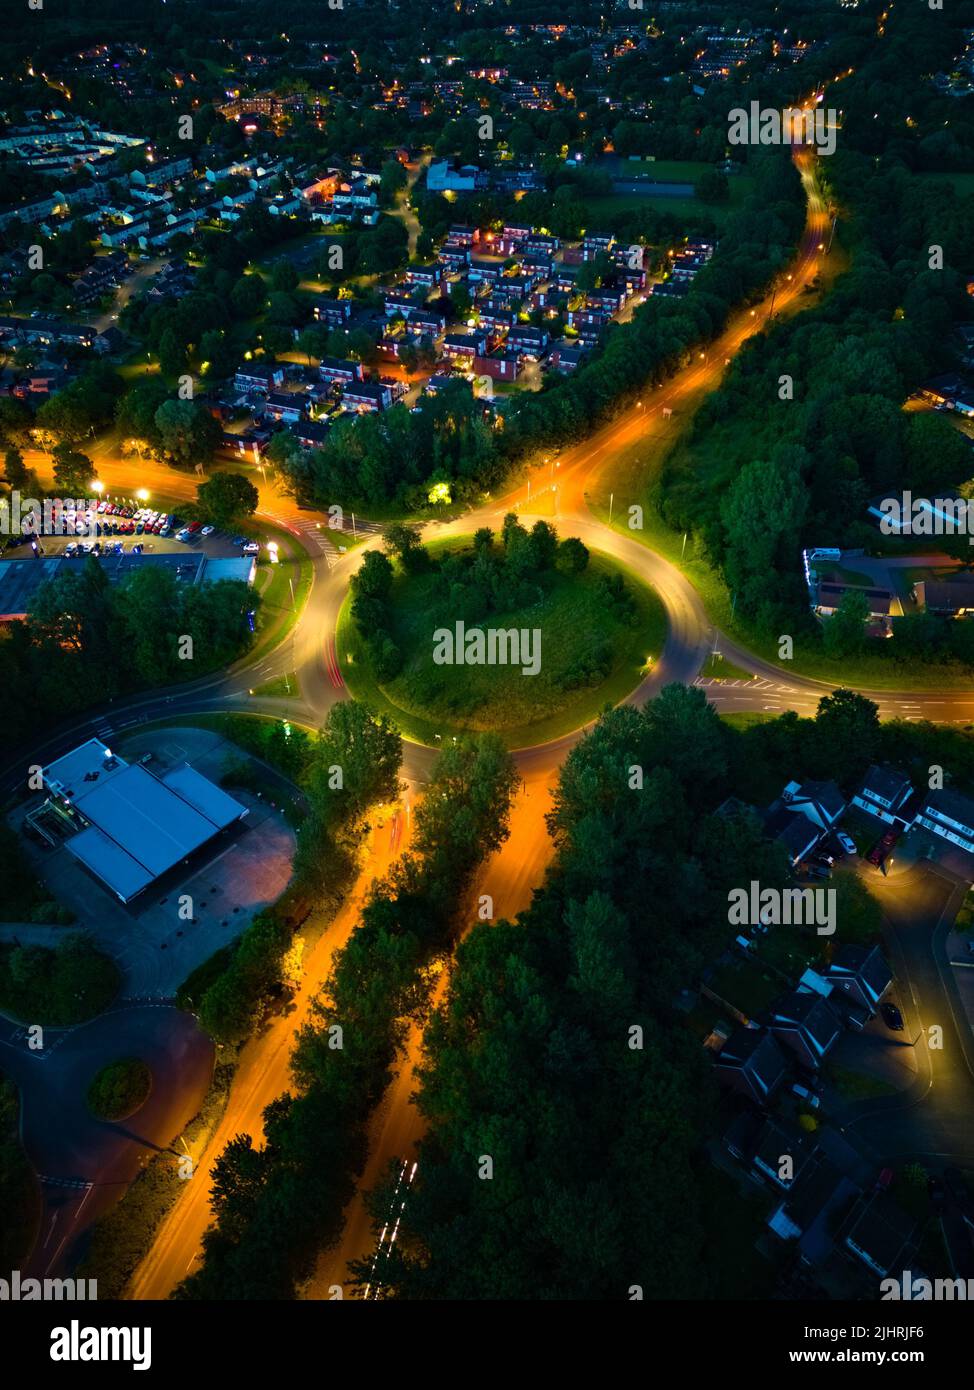 A Long Exposure aerial Night view of Redditch, UK Stock Photo